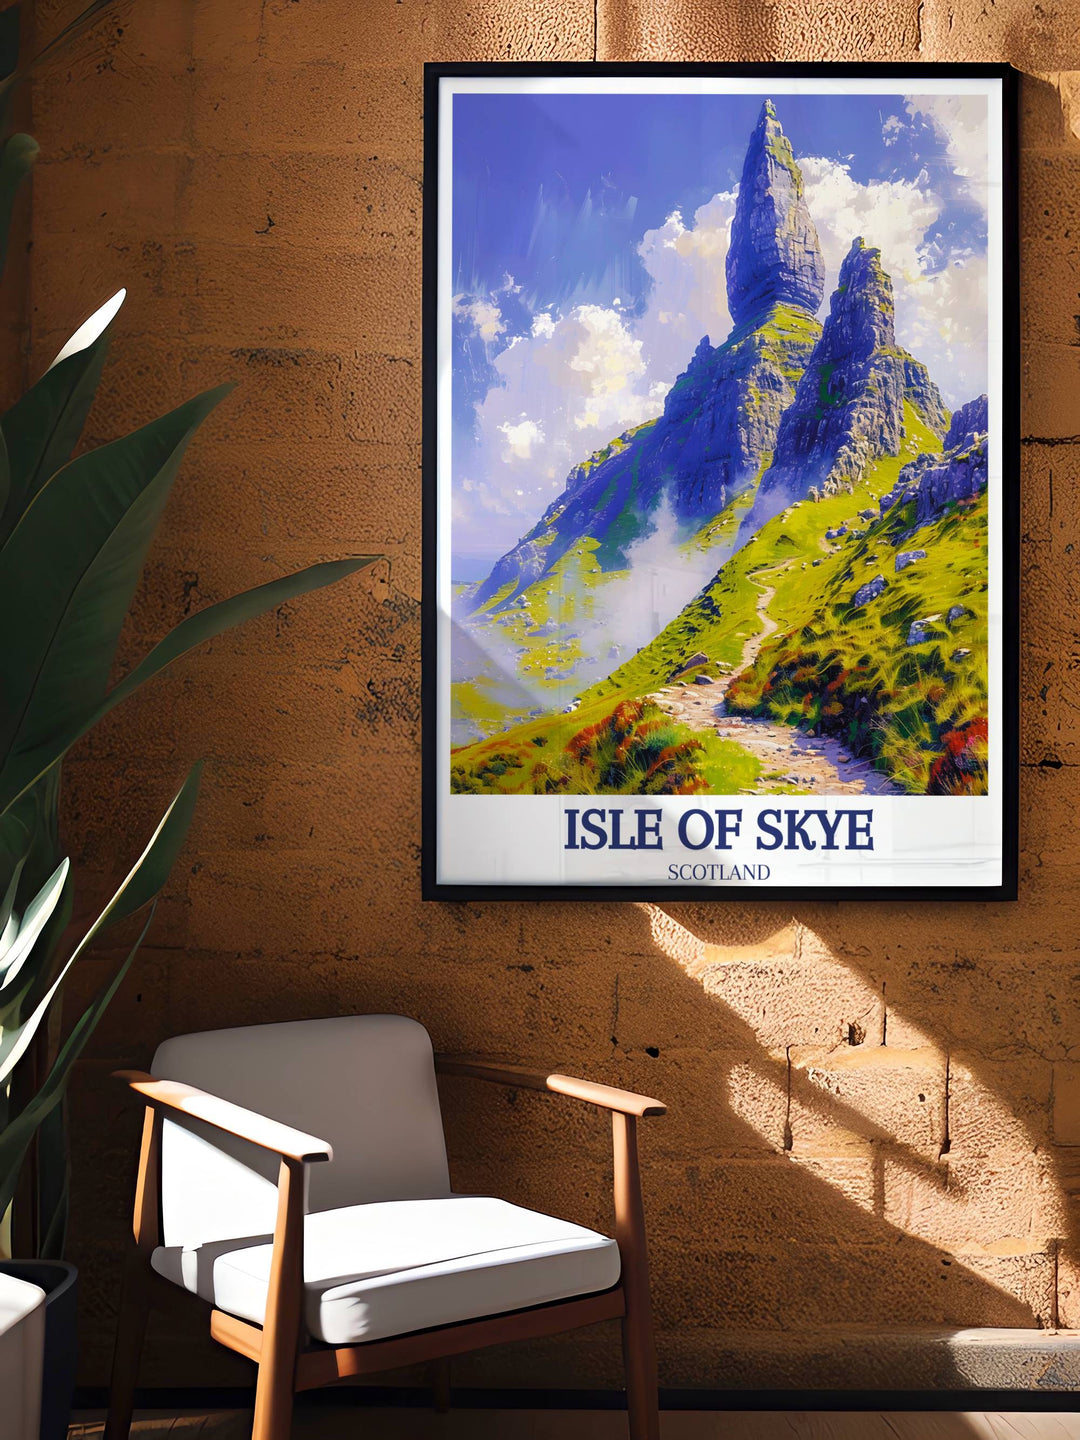 A classic Isle of Skye art print depicting The Storr in a vintage style, perfect for those who love retro travel posters and want to add a historical touch to their decor.